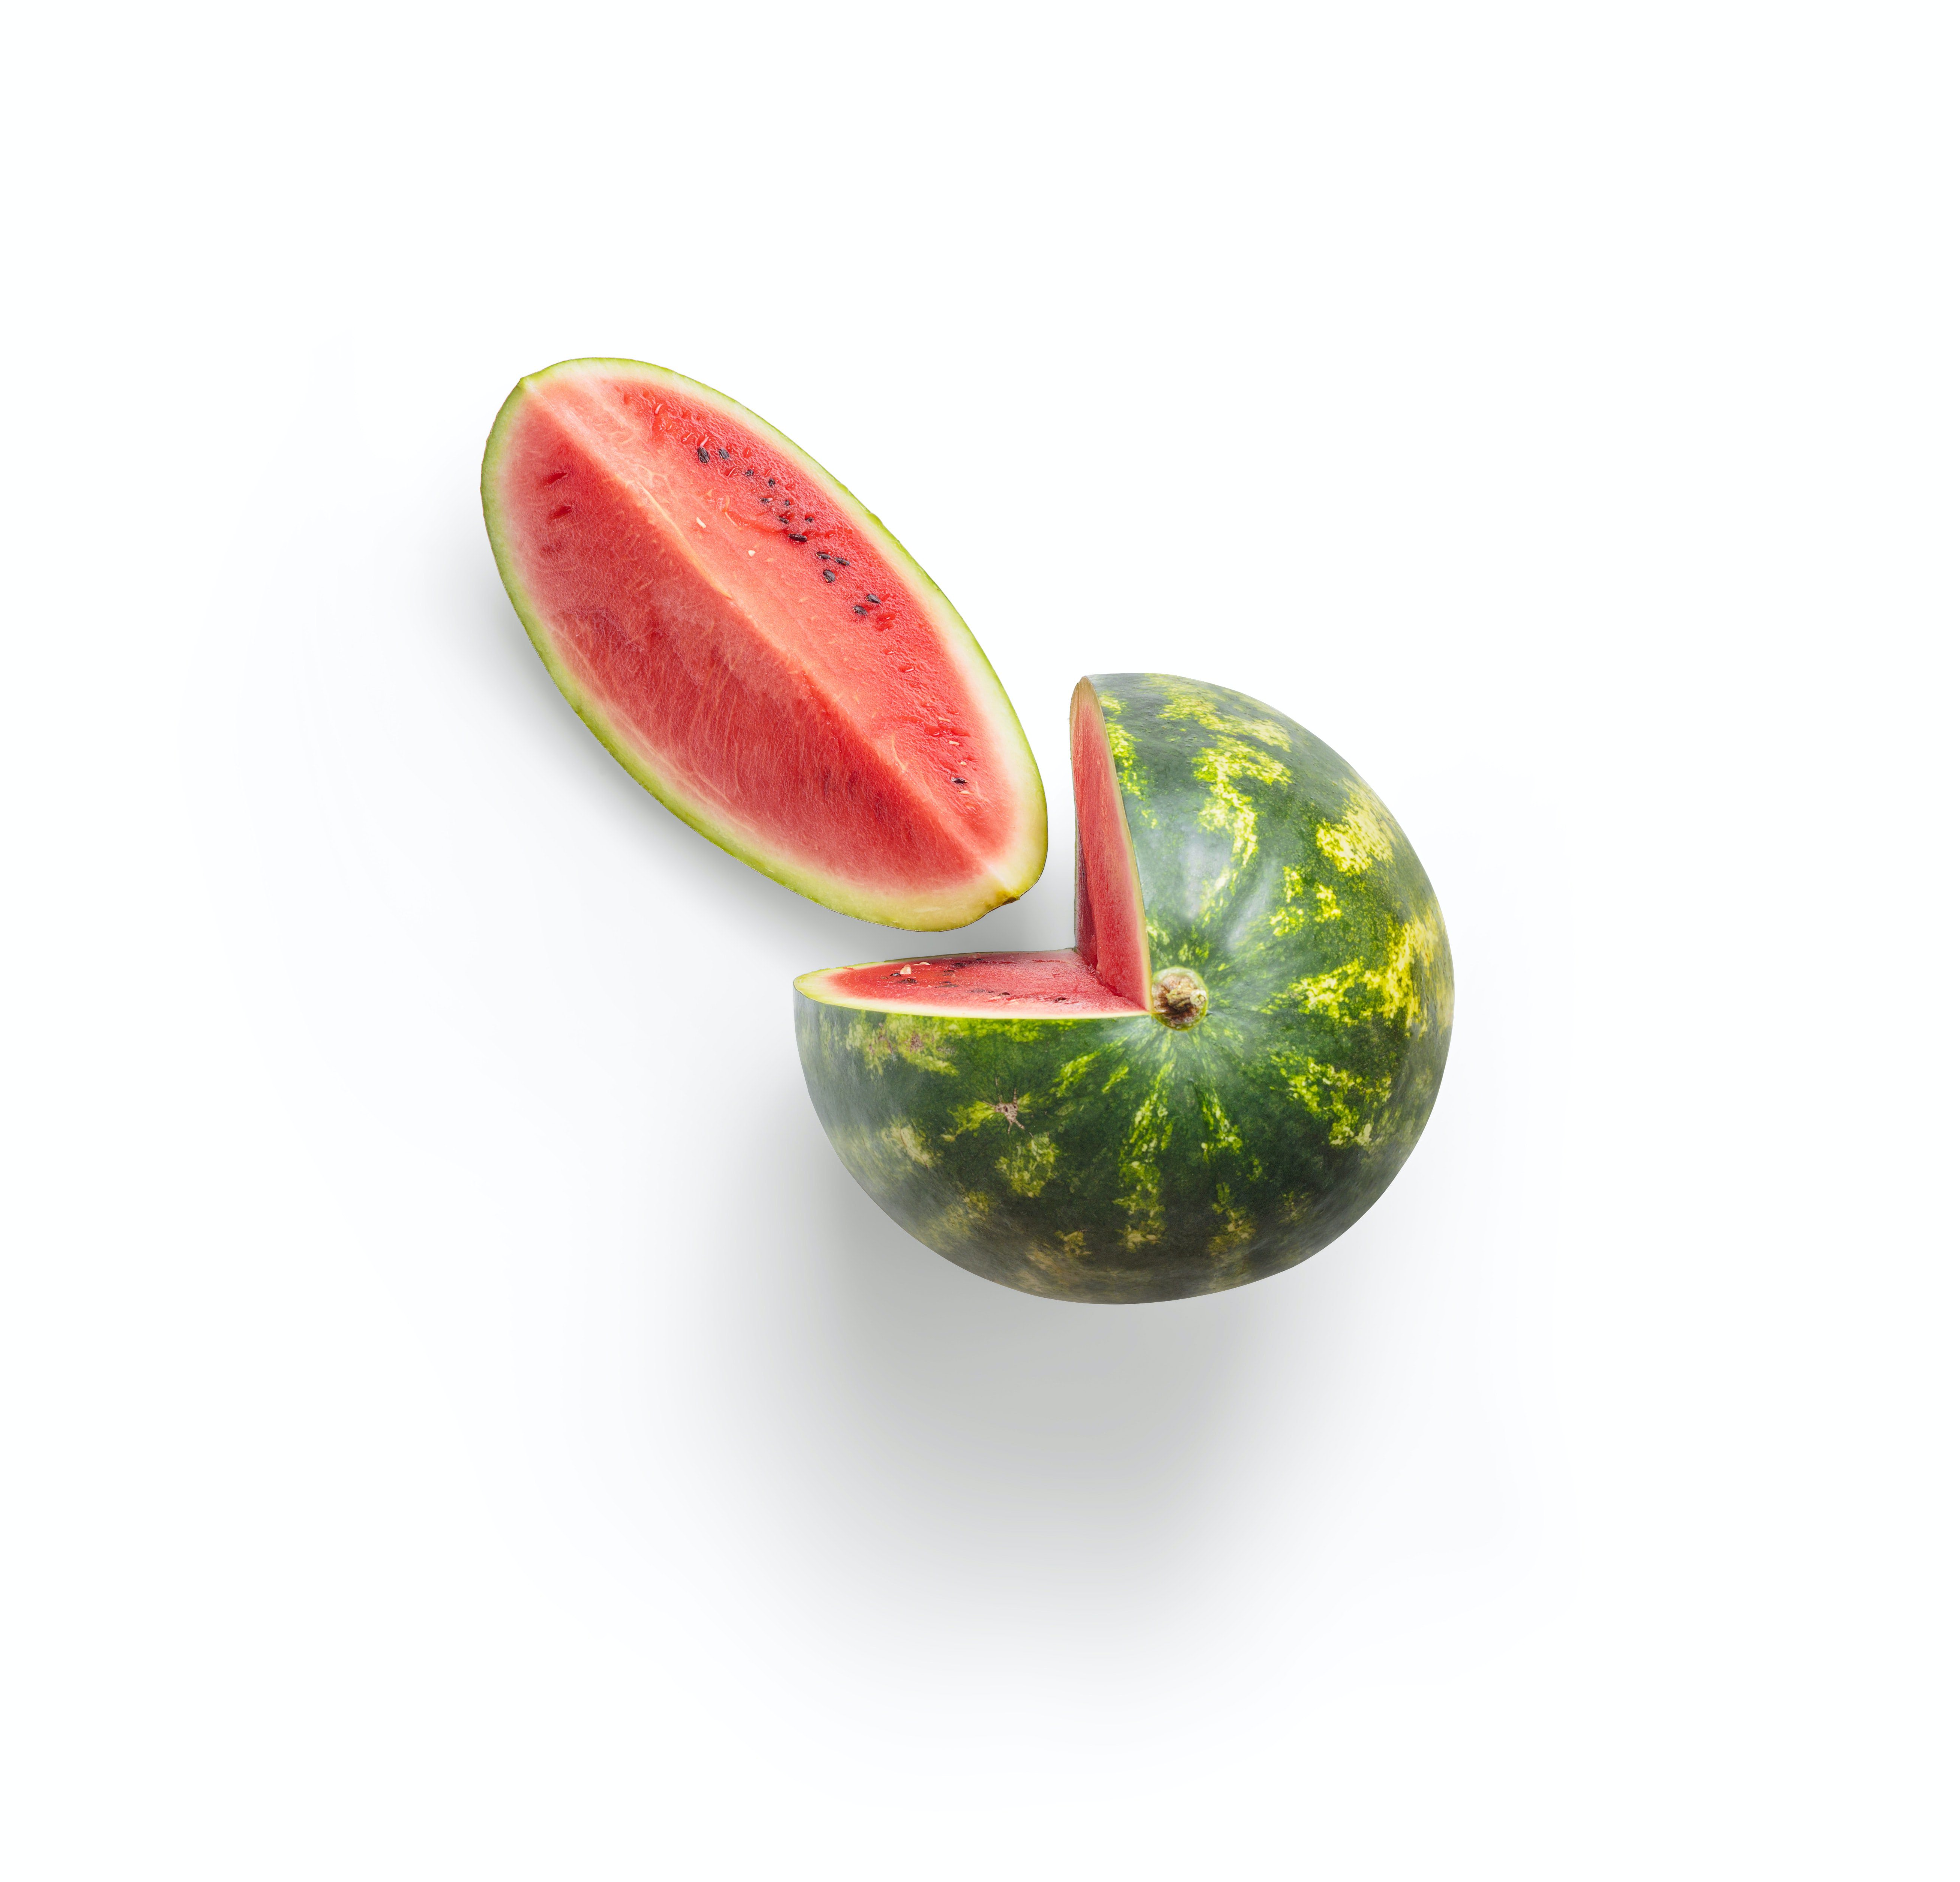 Is Watermelon Good or Bad for Diabetes?